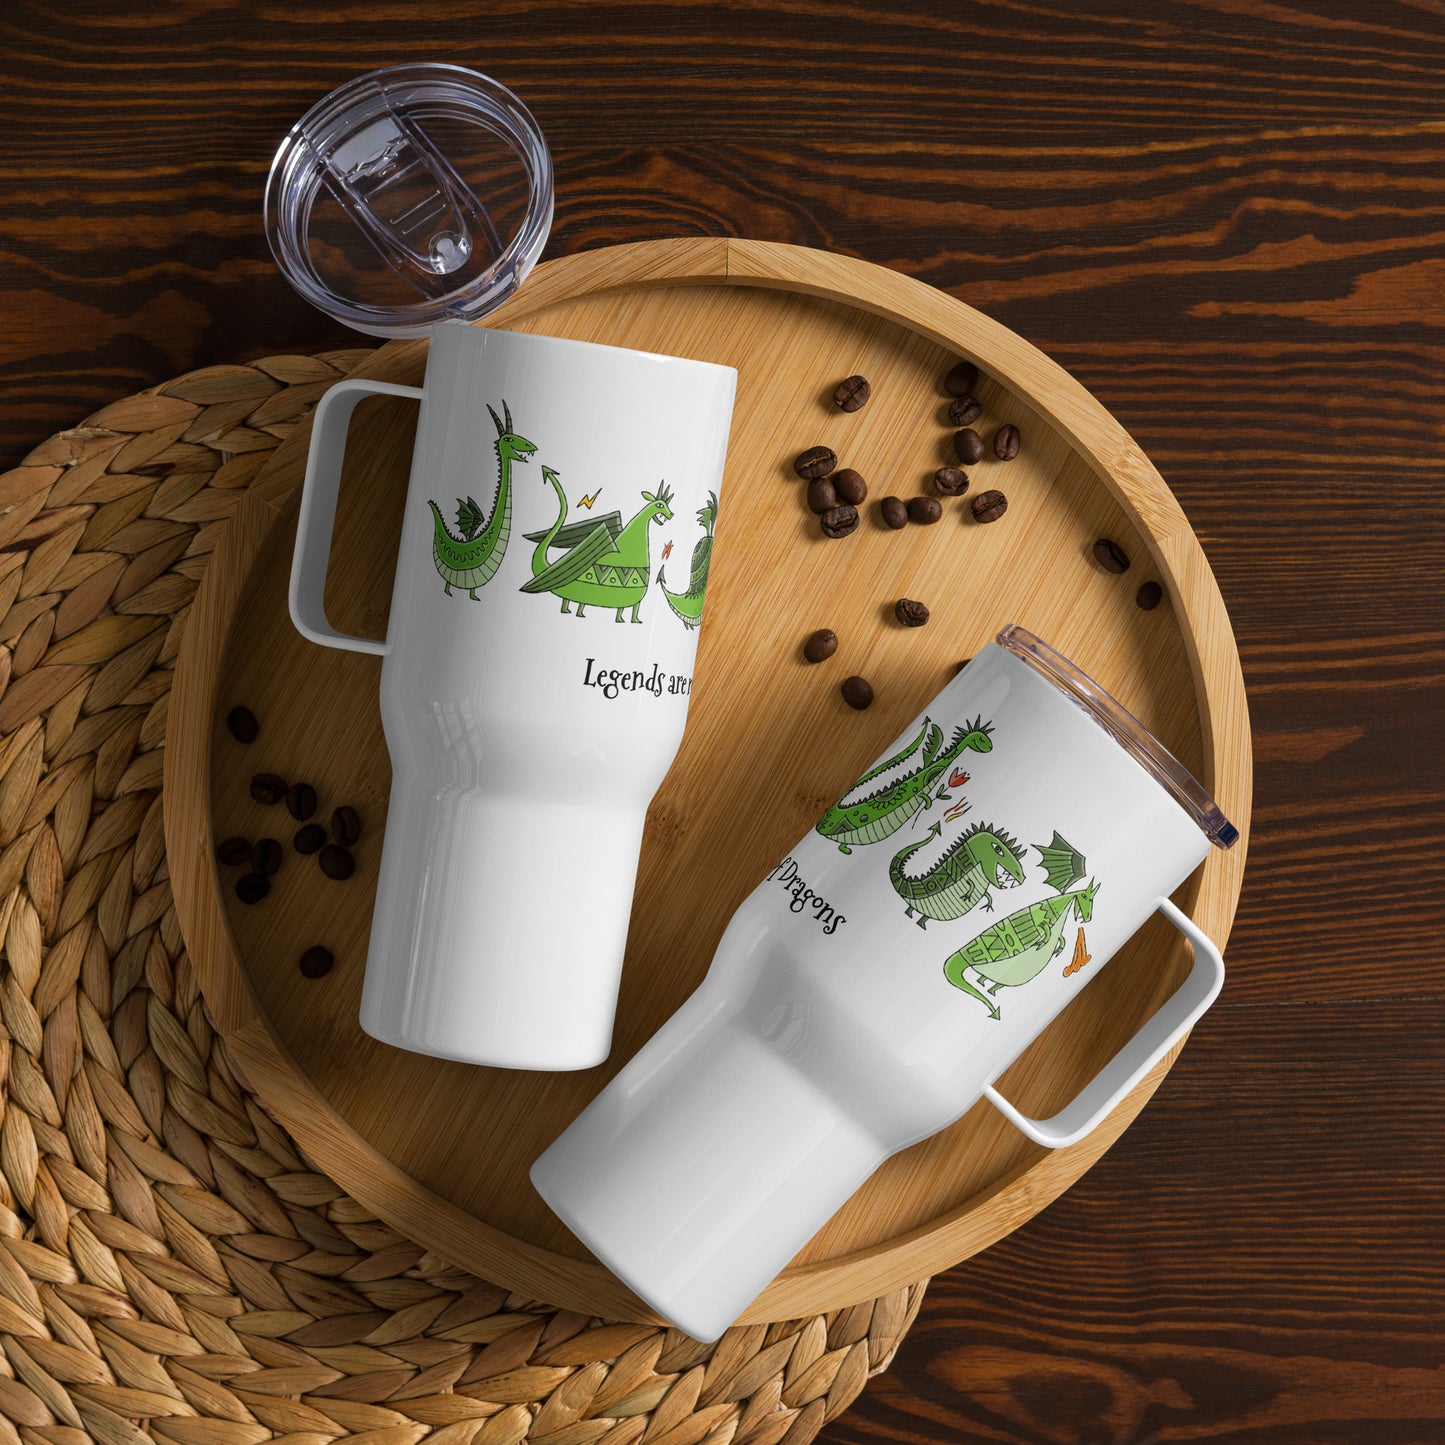 Personalised Travel mug with a handle. Funny Green Dragons print. 